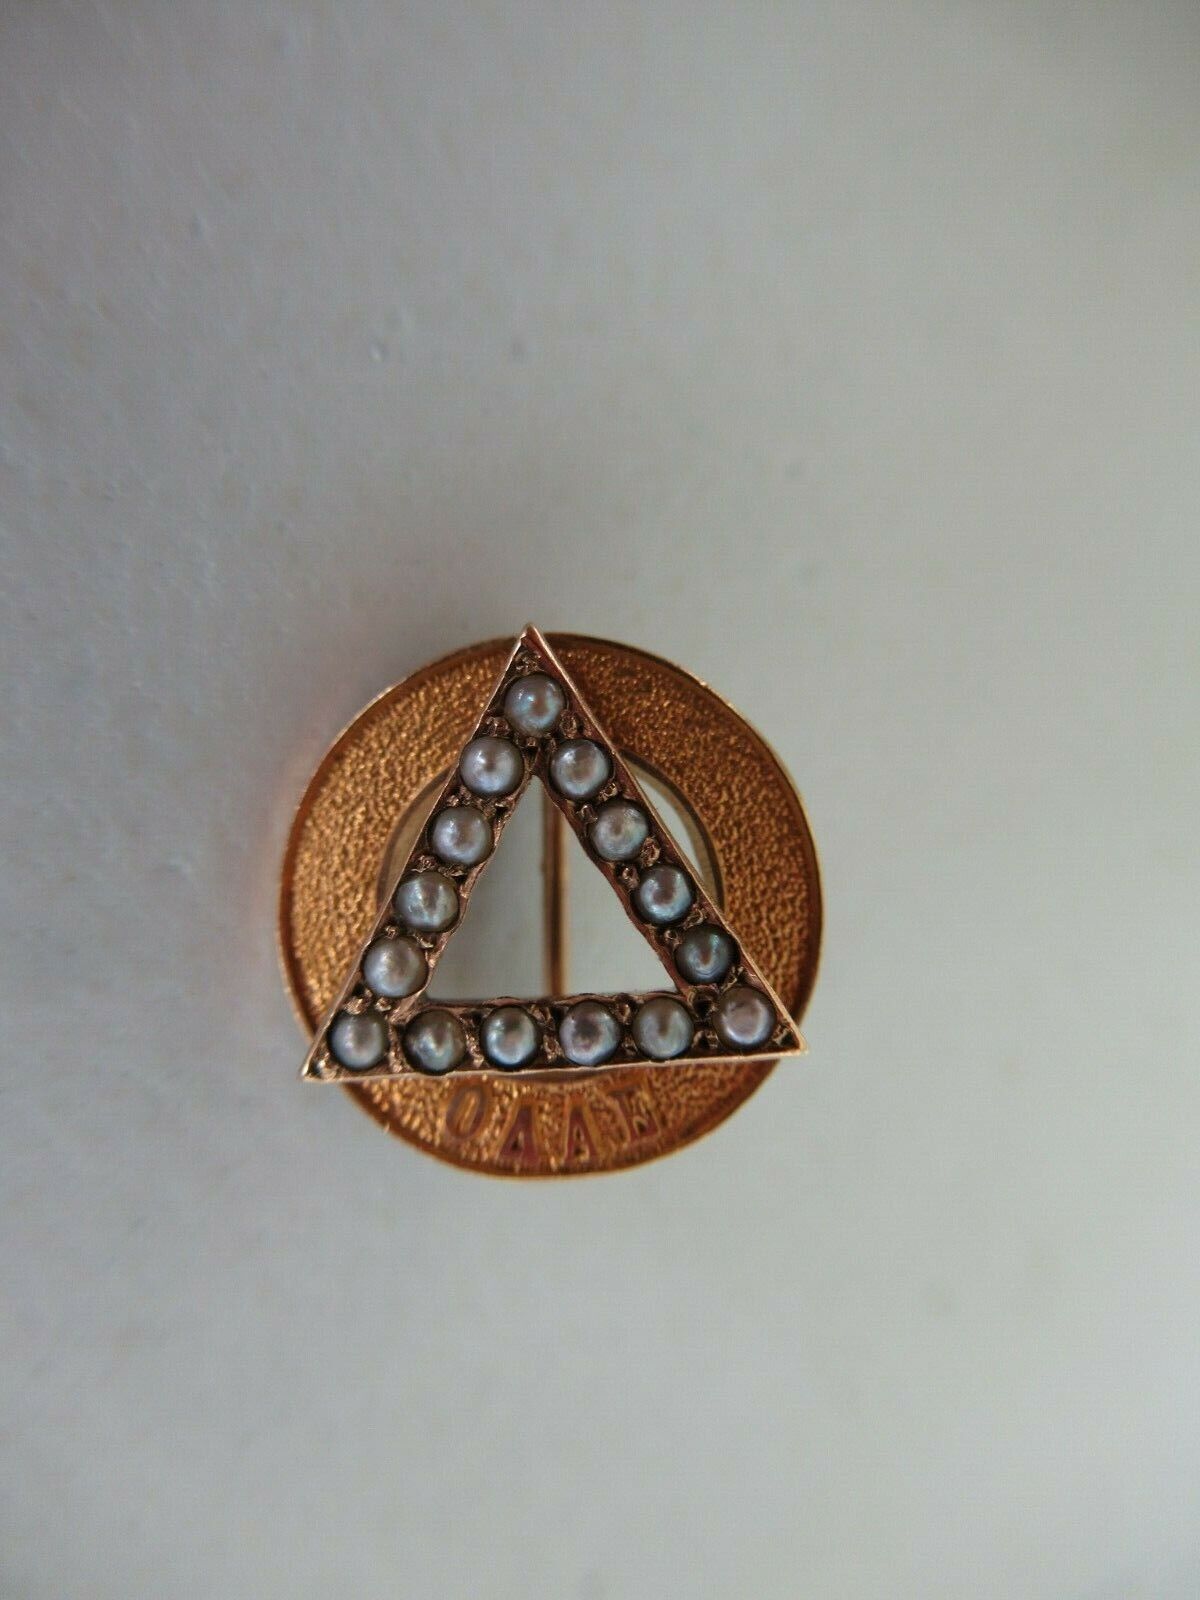 USA FRATERNITY PIN DELTA OMICRON. MADE IN GOLD. NAMED. MARKED. 901